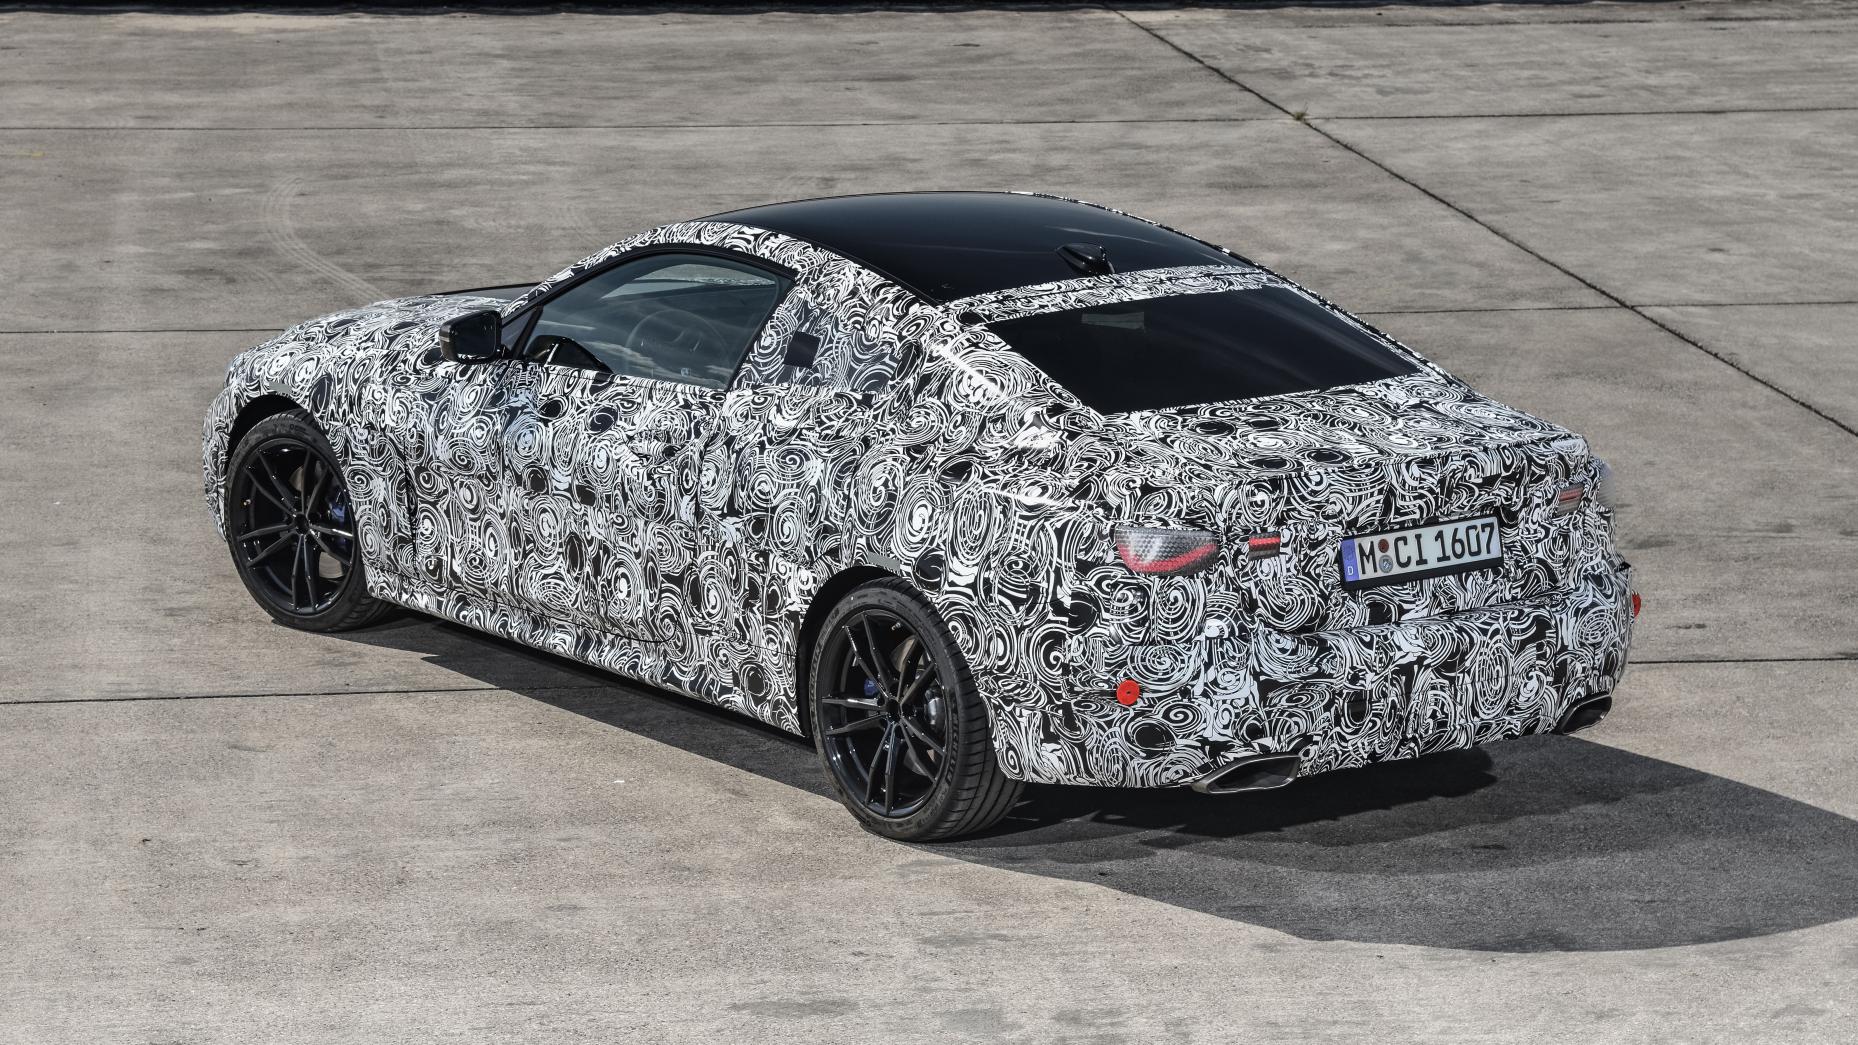 5. The upcoming M4 will get over 500bhp, probably